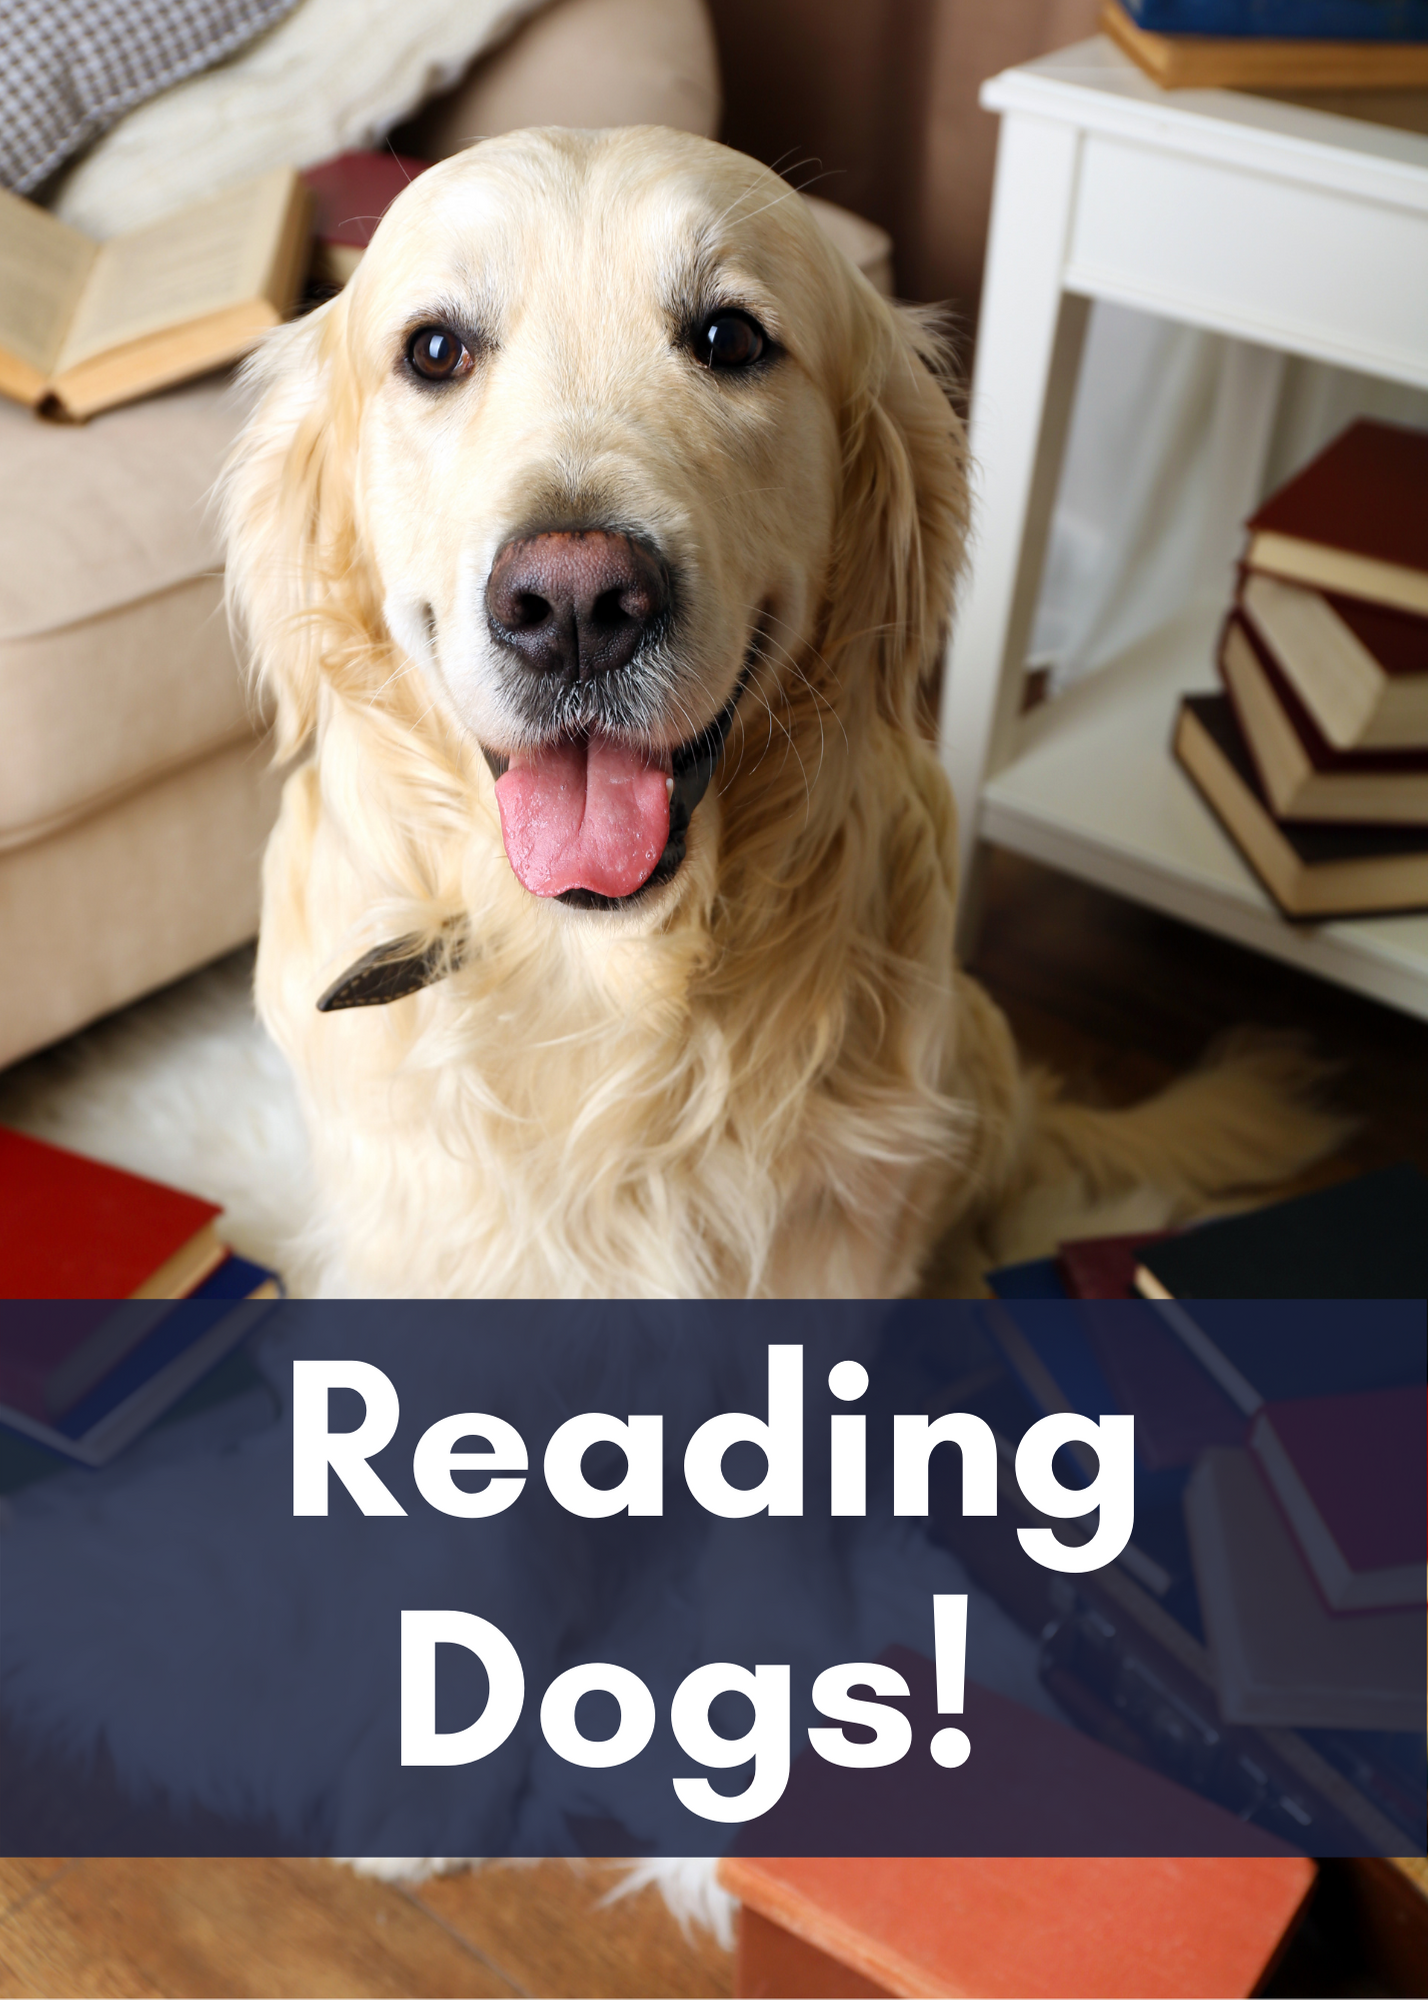 Reading Dogs Image